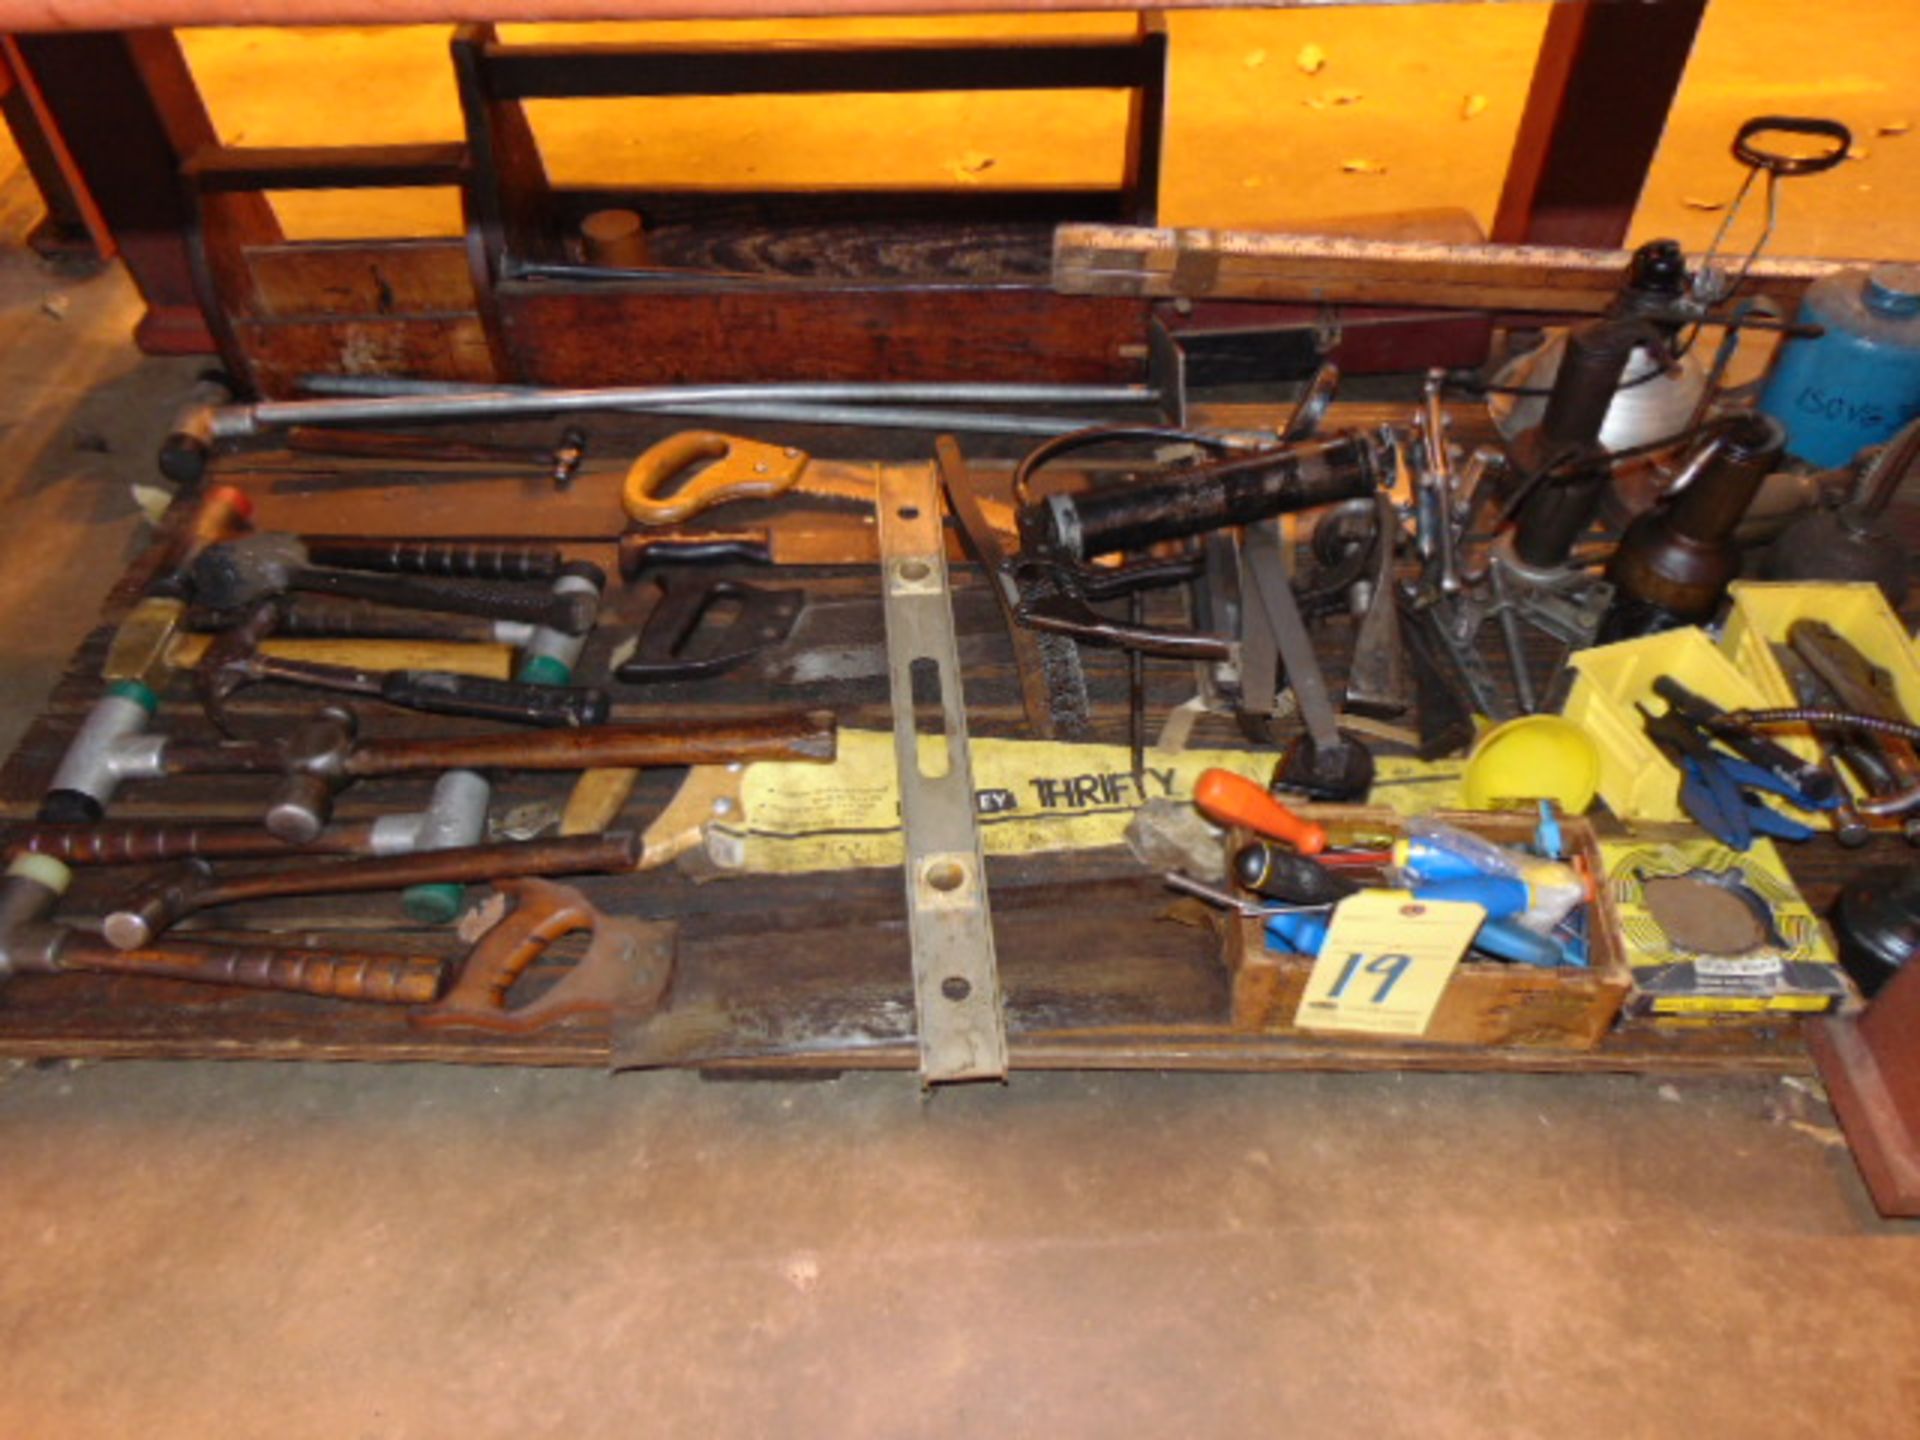 LOT CONSISTING OF: assorted hand tools & misc. (under one table)